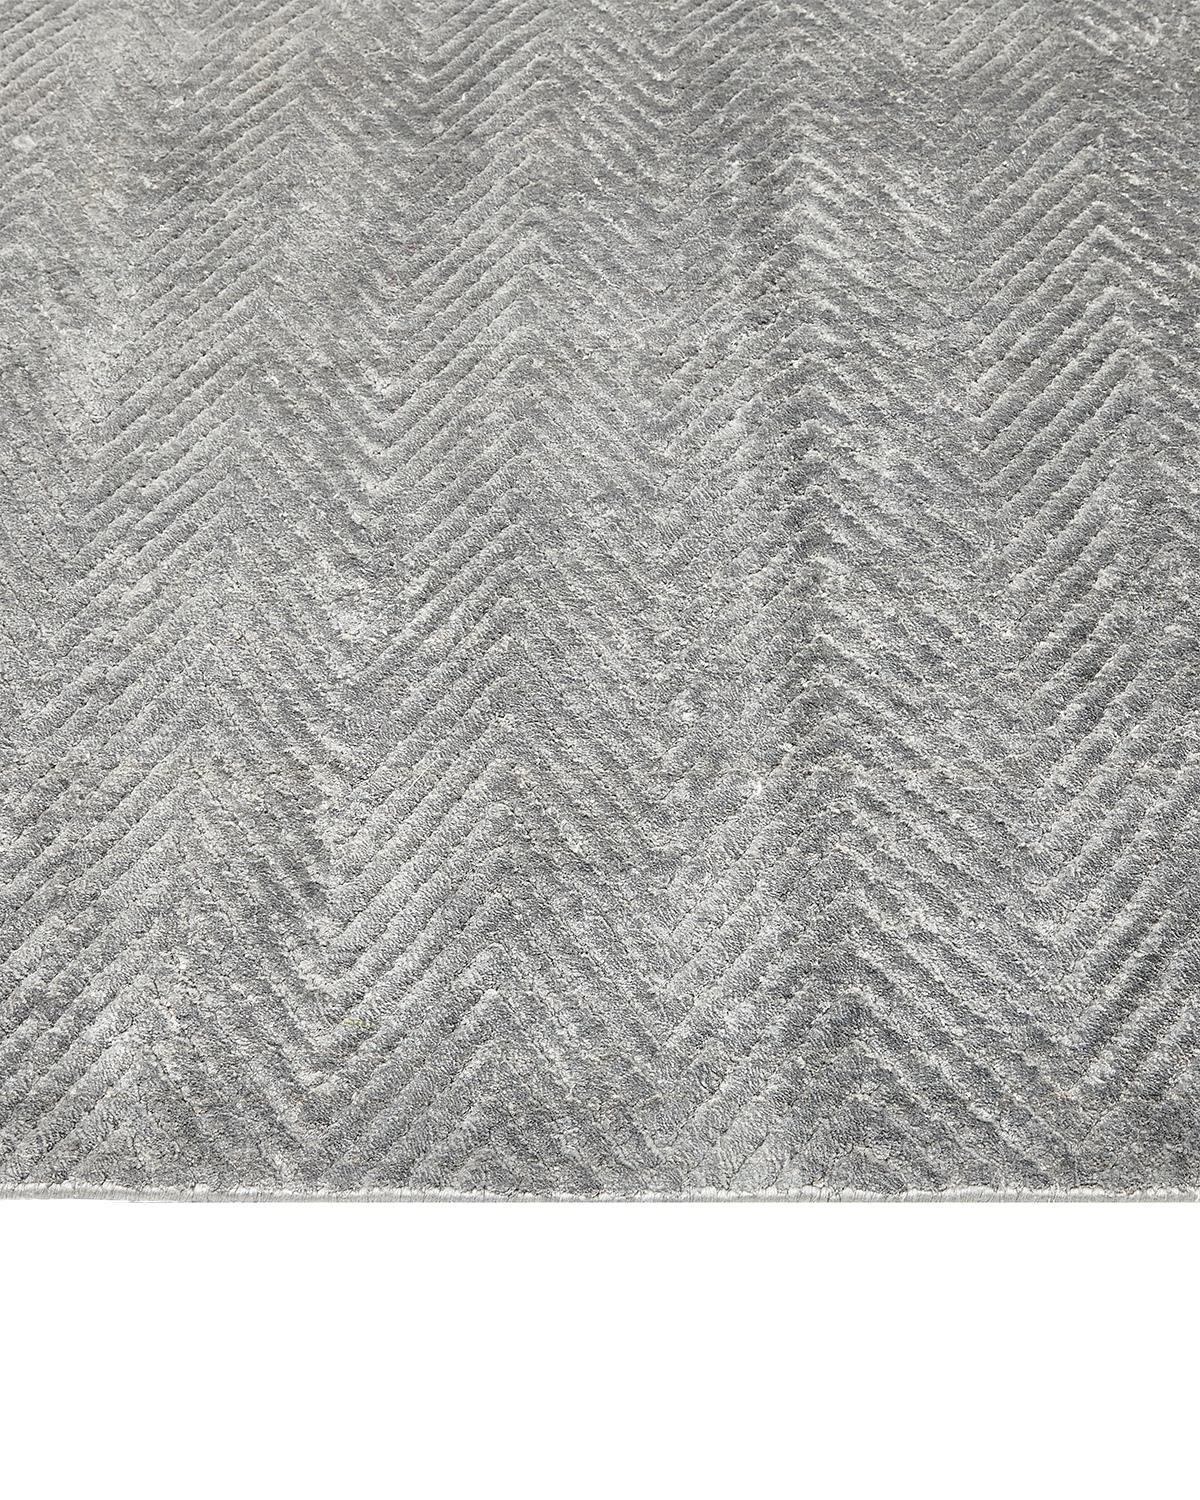 Indian Solo Rugs Modern Chevron Hand Loomed Gray Area Rug For Sale